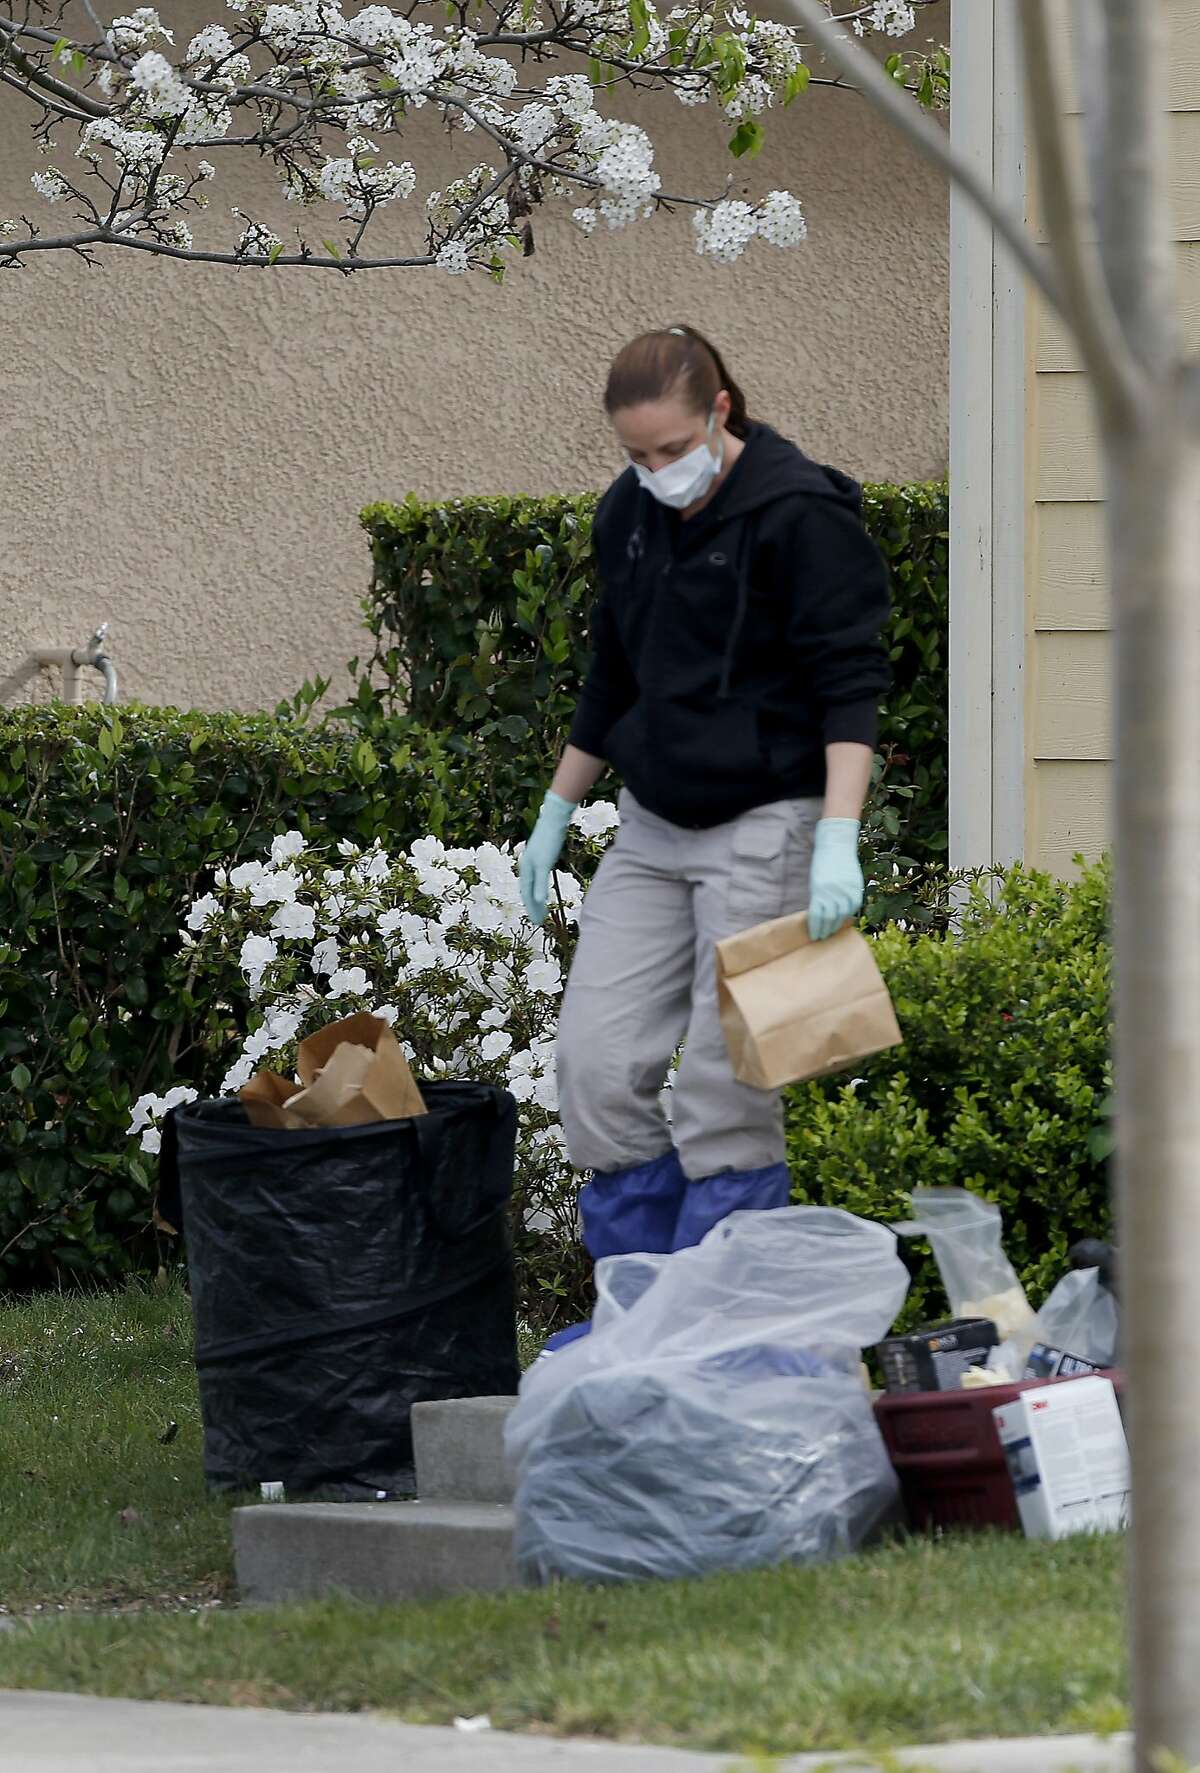 Some items were left on the front lawn of the home on Kirkland Avenue where investigators worked on Mare Island Tuesday March 24, 2015. The Vallejo, Calif. police department says Denise Huskins, a Kaiser physical therapist, is the apparent victim of a kidnapping for ransom.